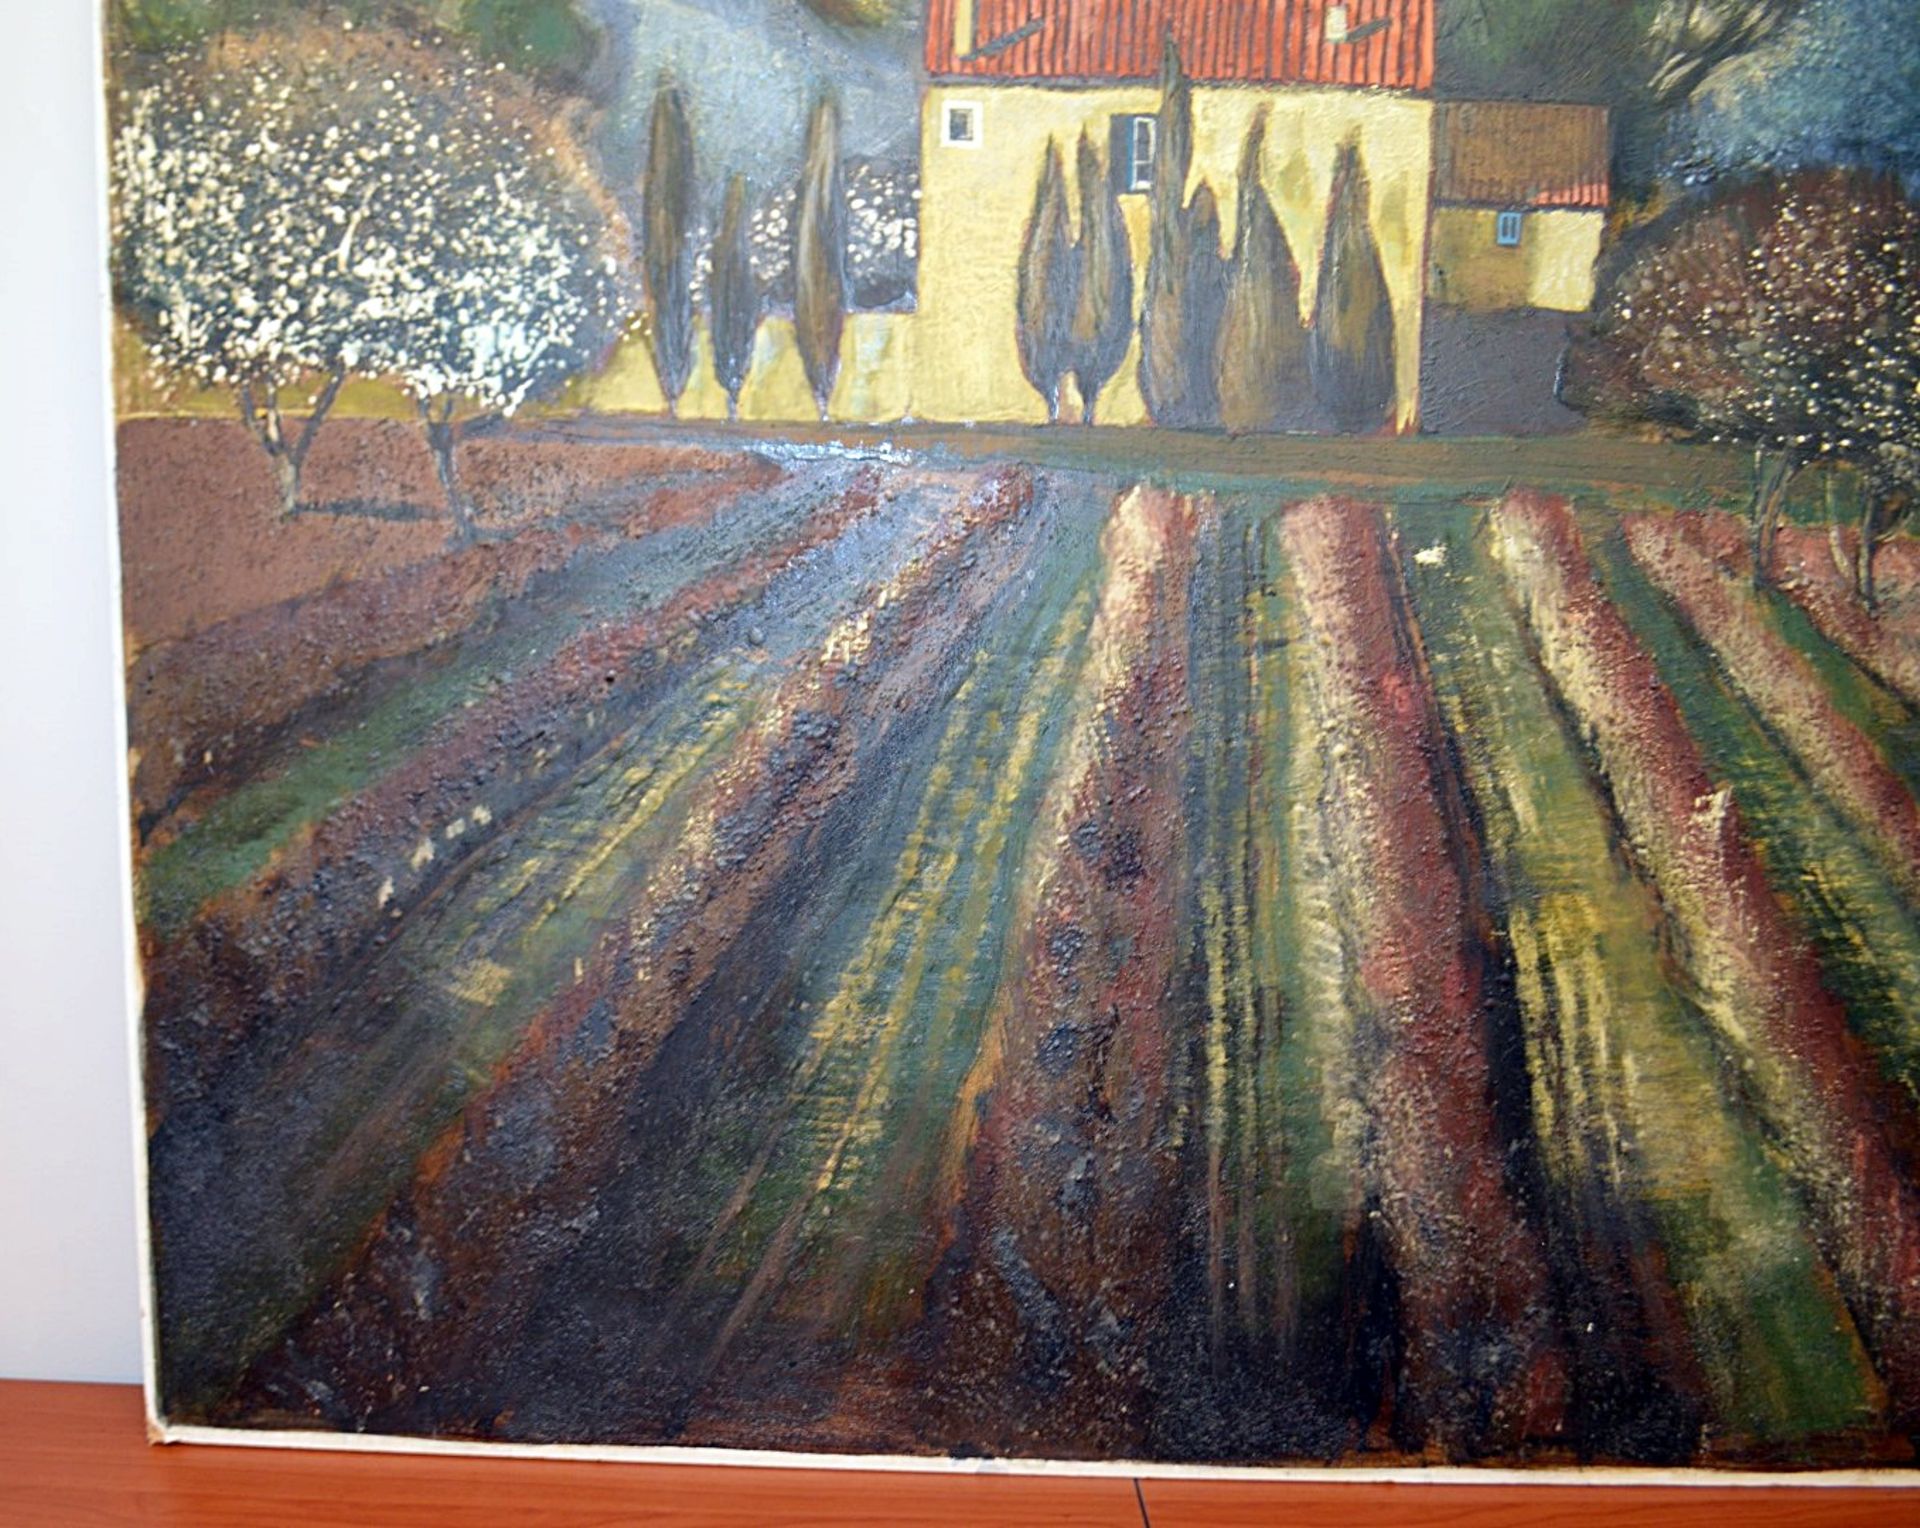 1 x Original Signed Painting Of A Farmhouse In France By Lydia Bauman (1998) - Dimensions: 122 x - Image 5 of 9